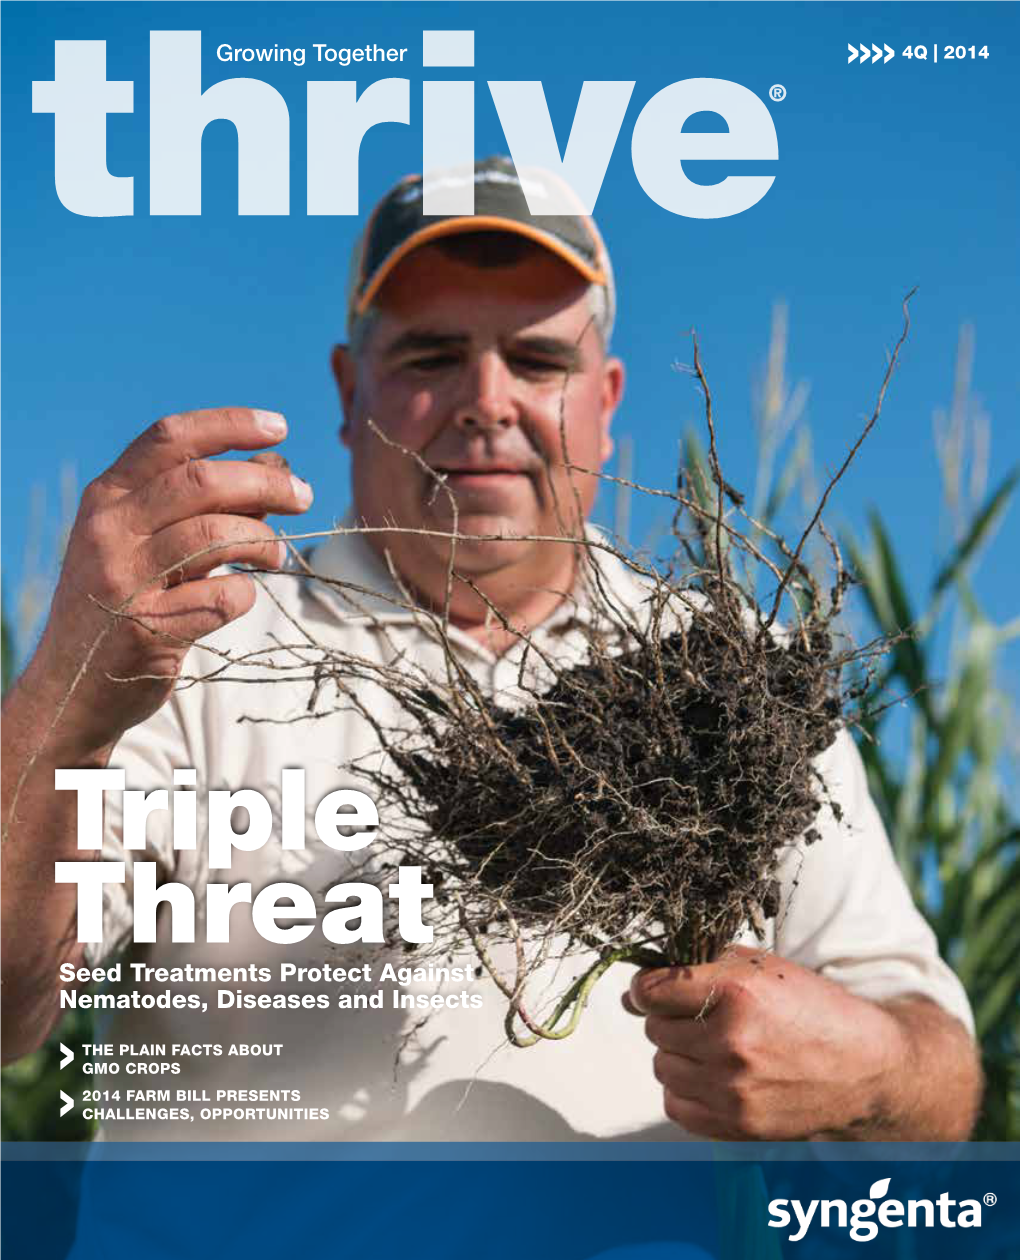 Triple Threat Seed Treatments Protect Against Nematodes, Diseases and Insects